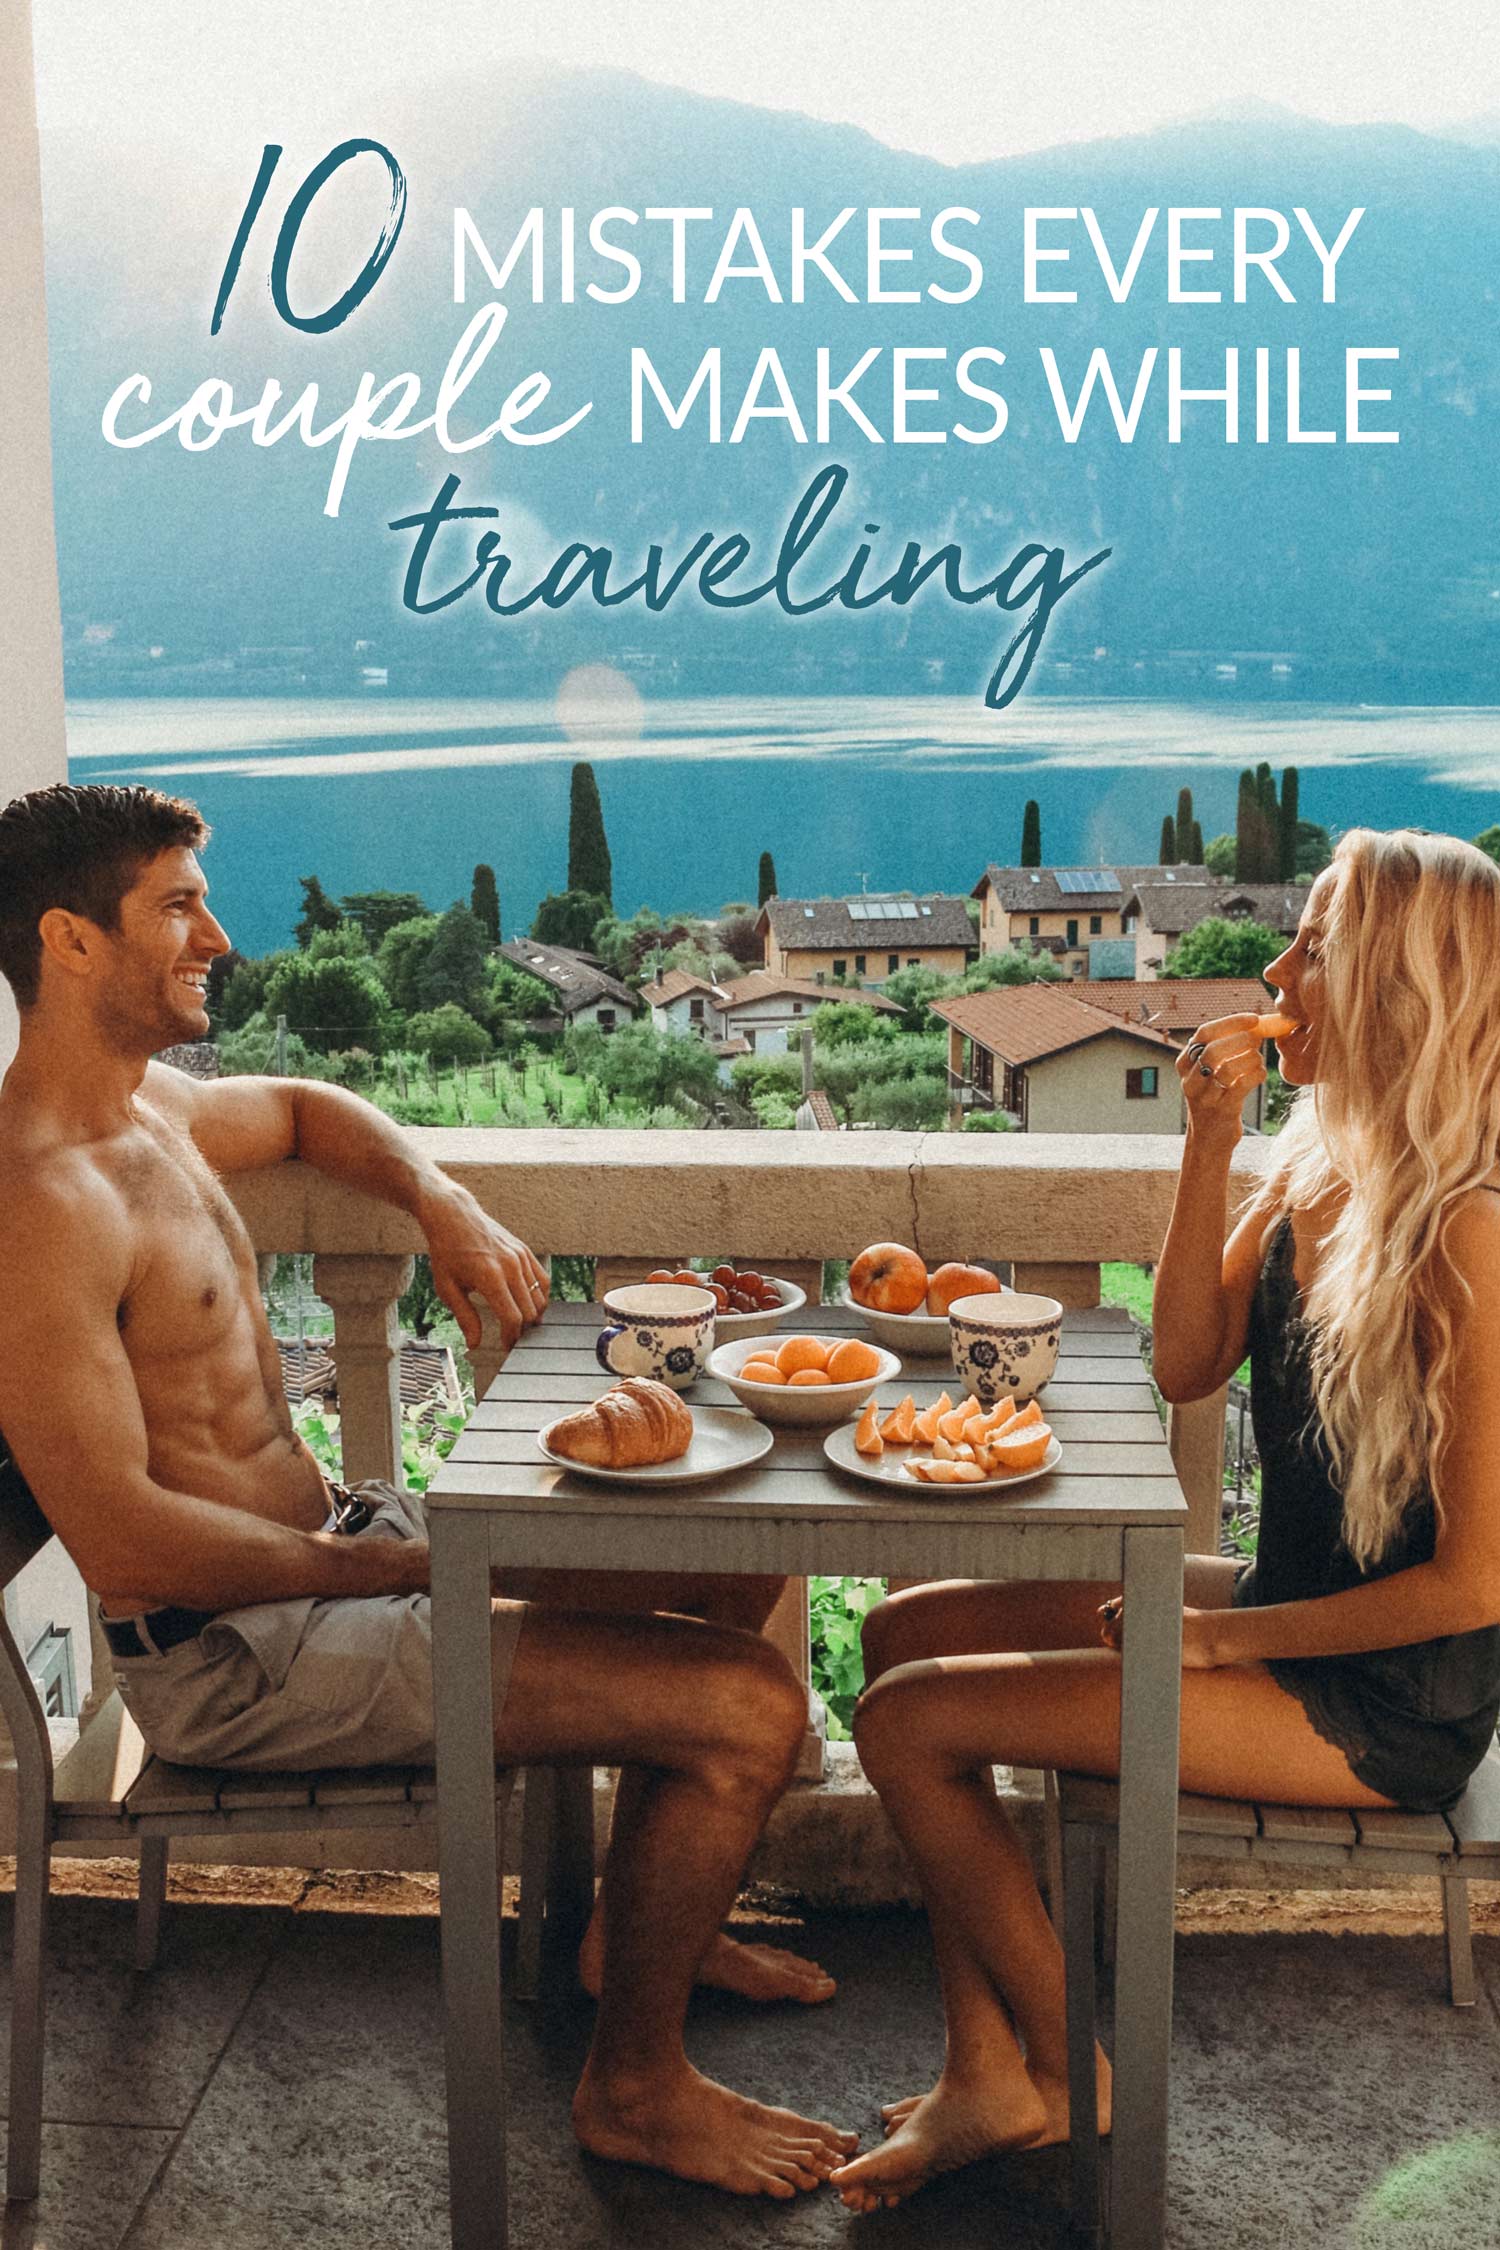 10 Mistakes Couples Make While Traveling